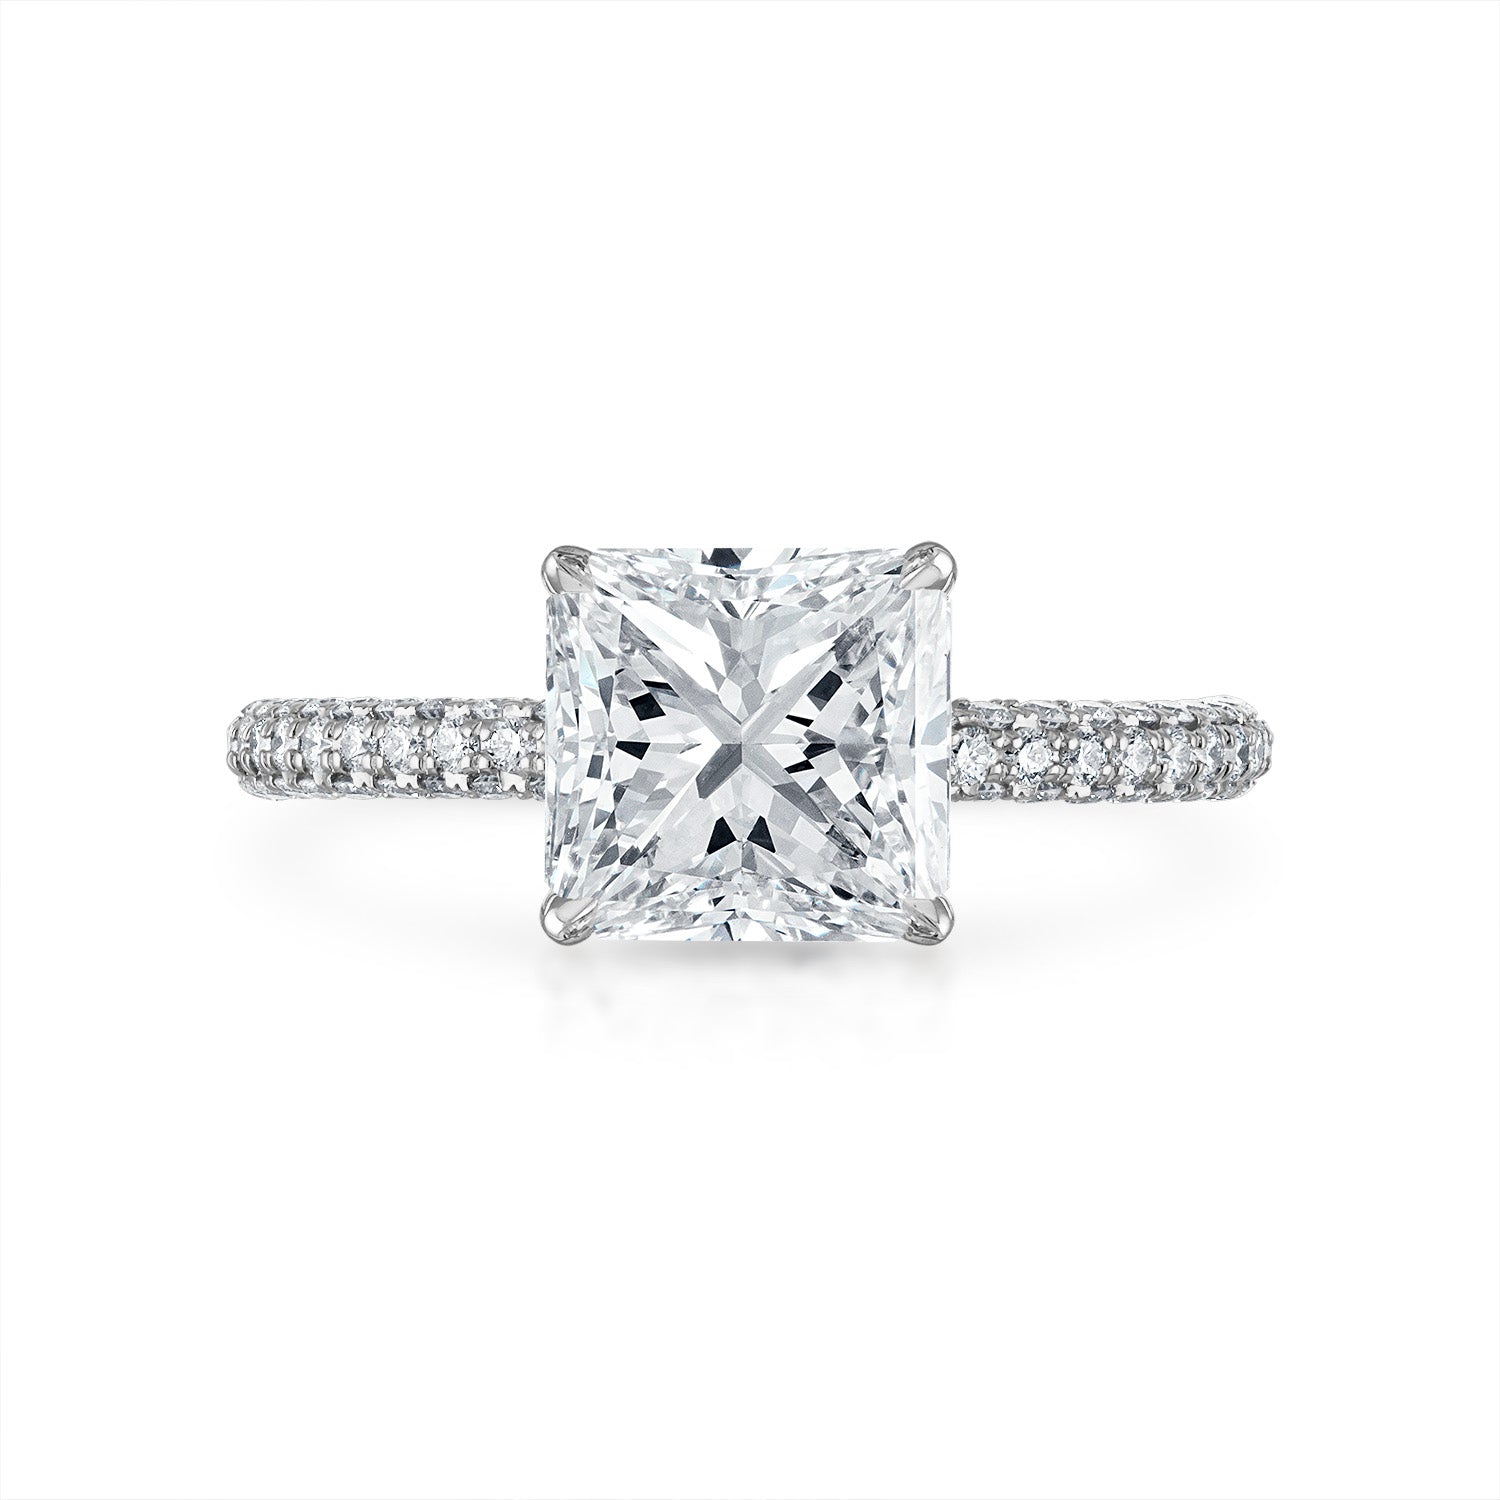 Three Sided Pave Engagement Ring